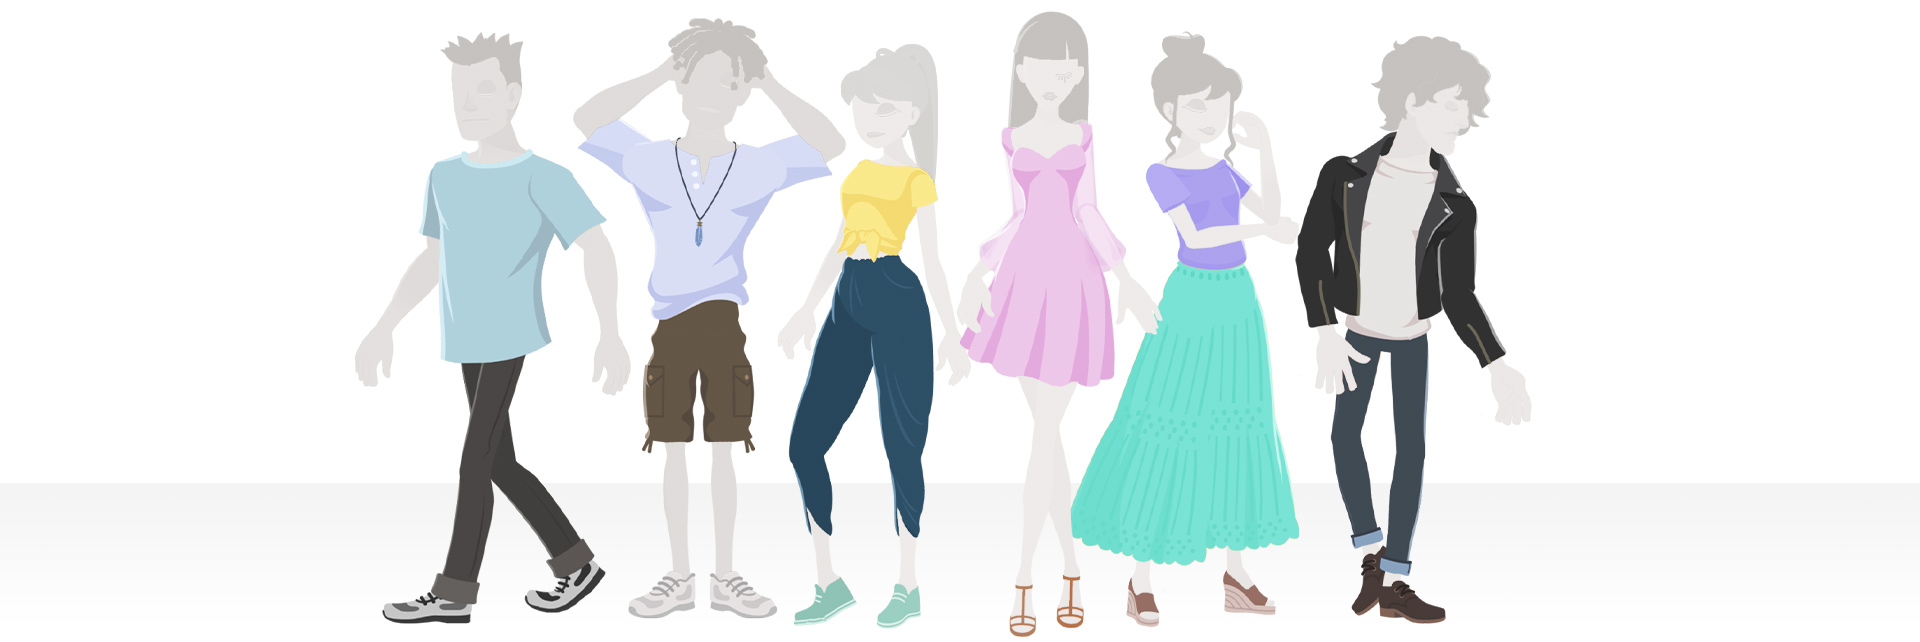 2d clothes animation - casual outfits